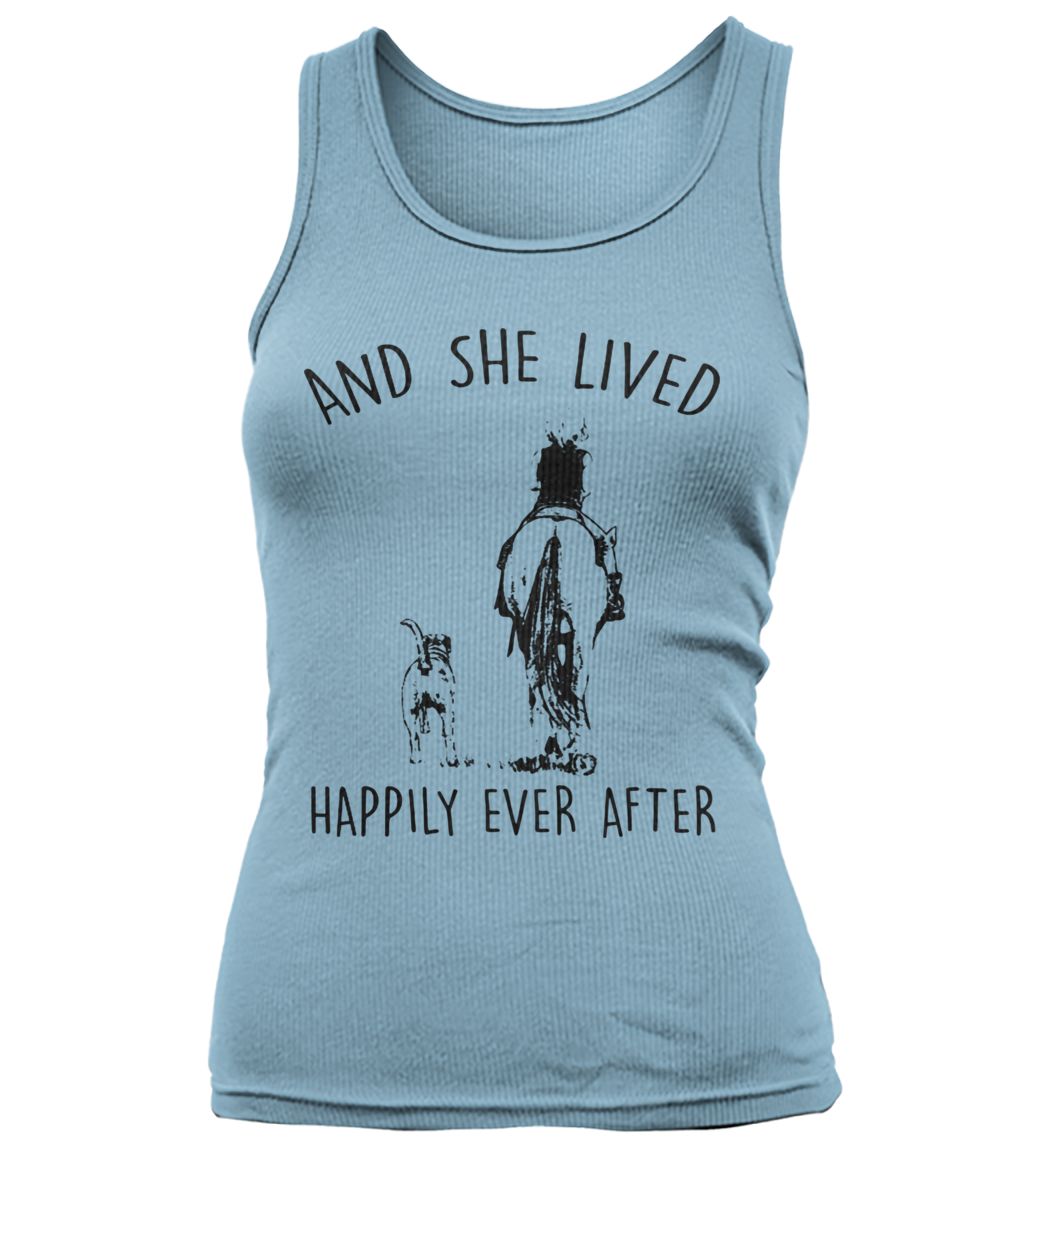 Horse and she lived happily ever after women's tank top